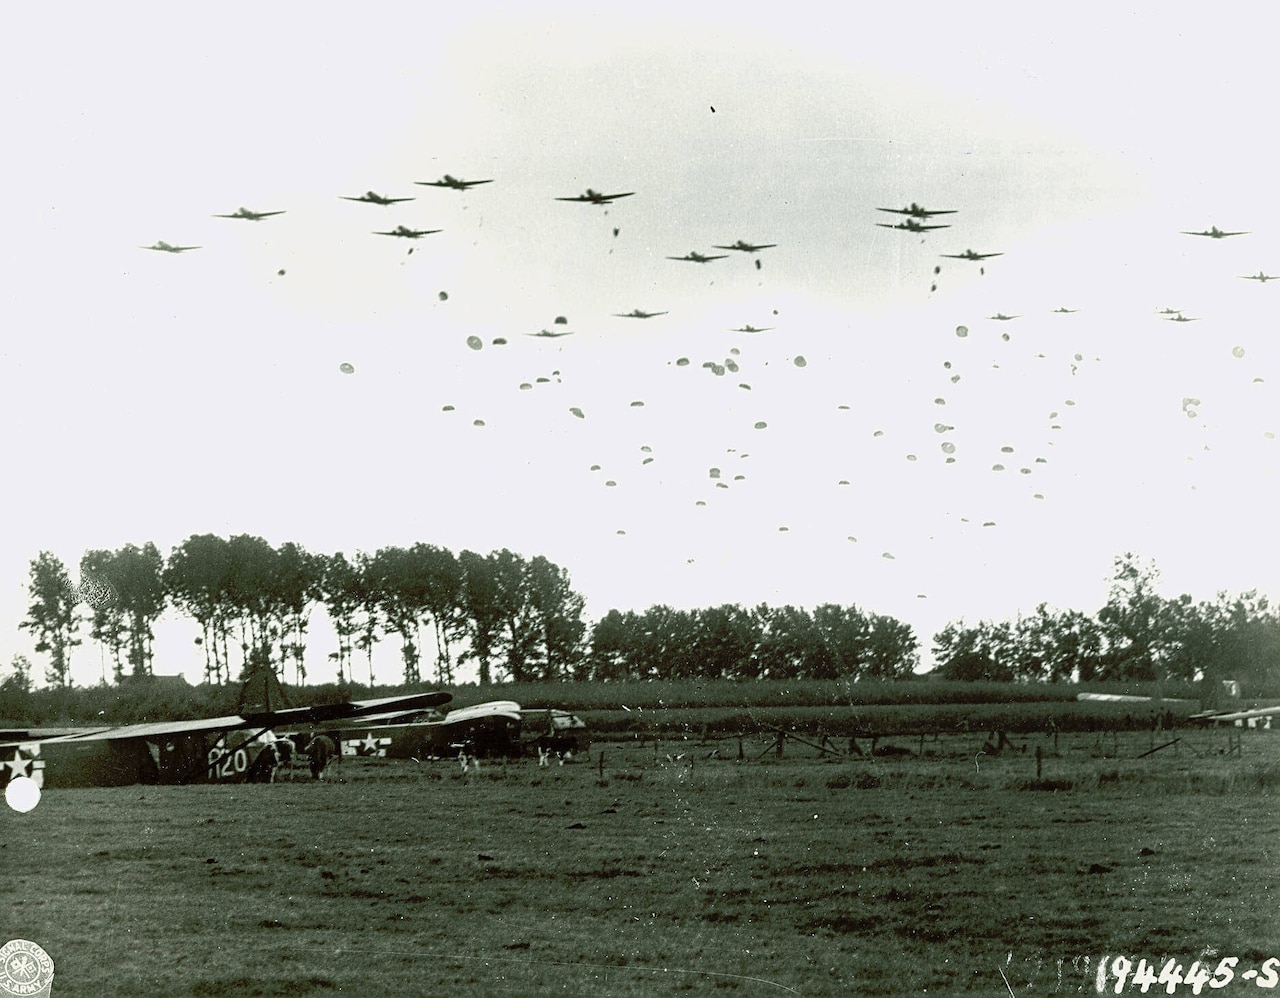 Parachutists jump from airplanes while dozens of others drift toward a field below.